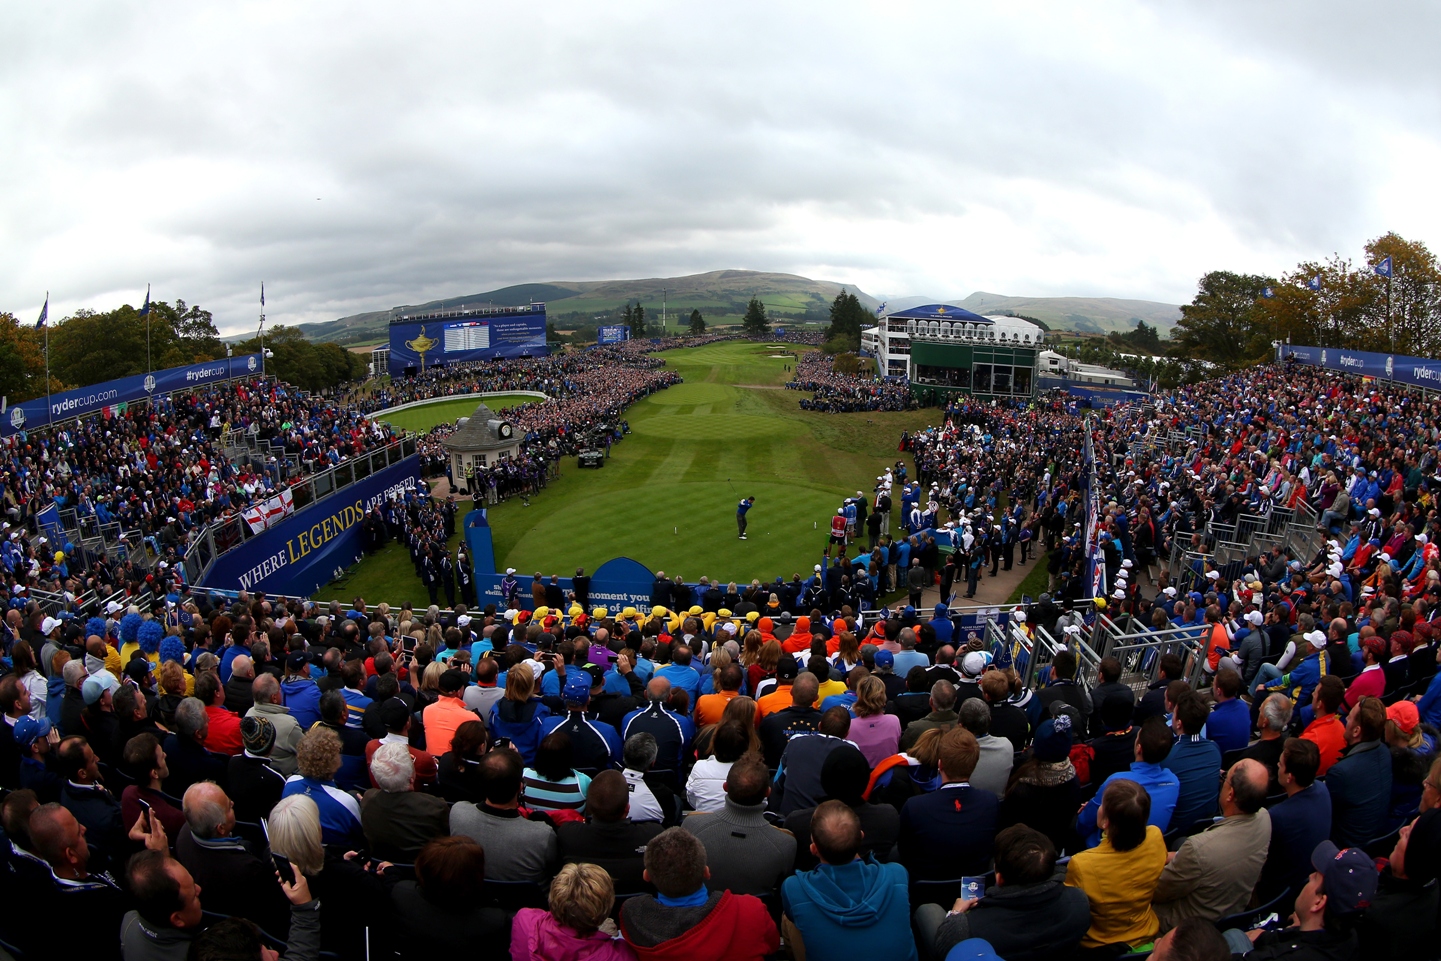 Europe defends Ryder Cup title in style in Gleneagles